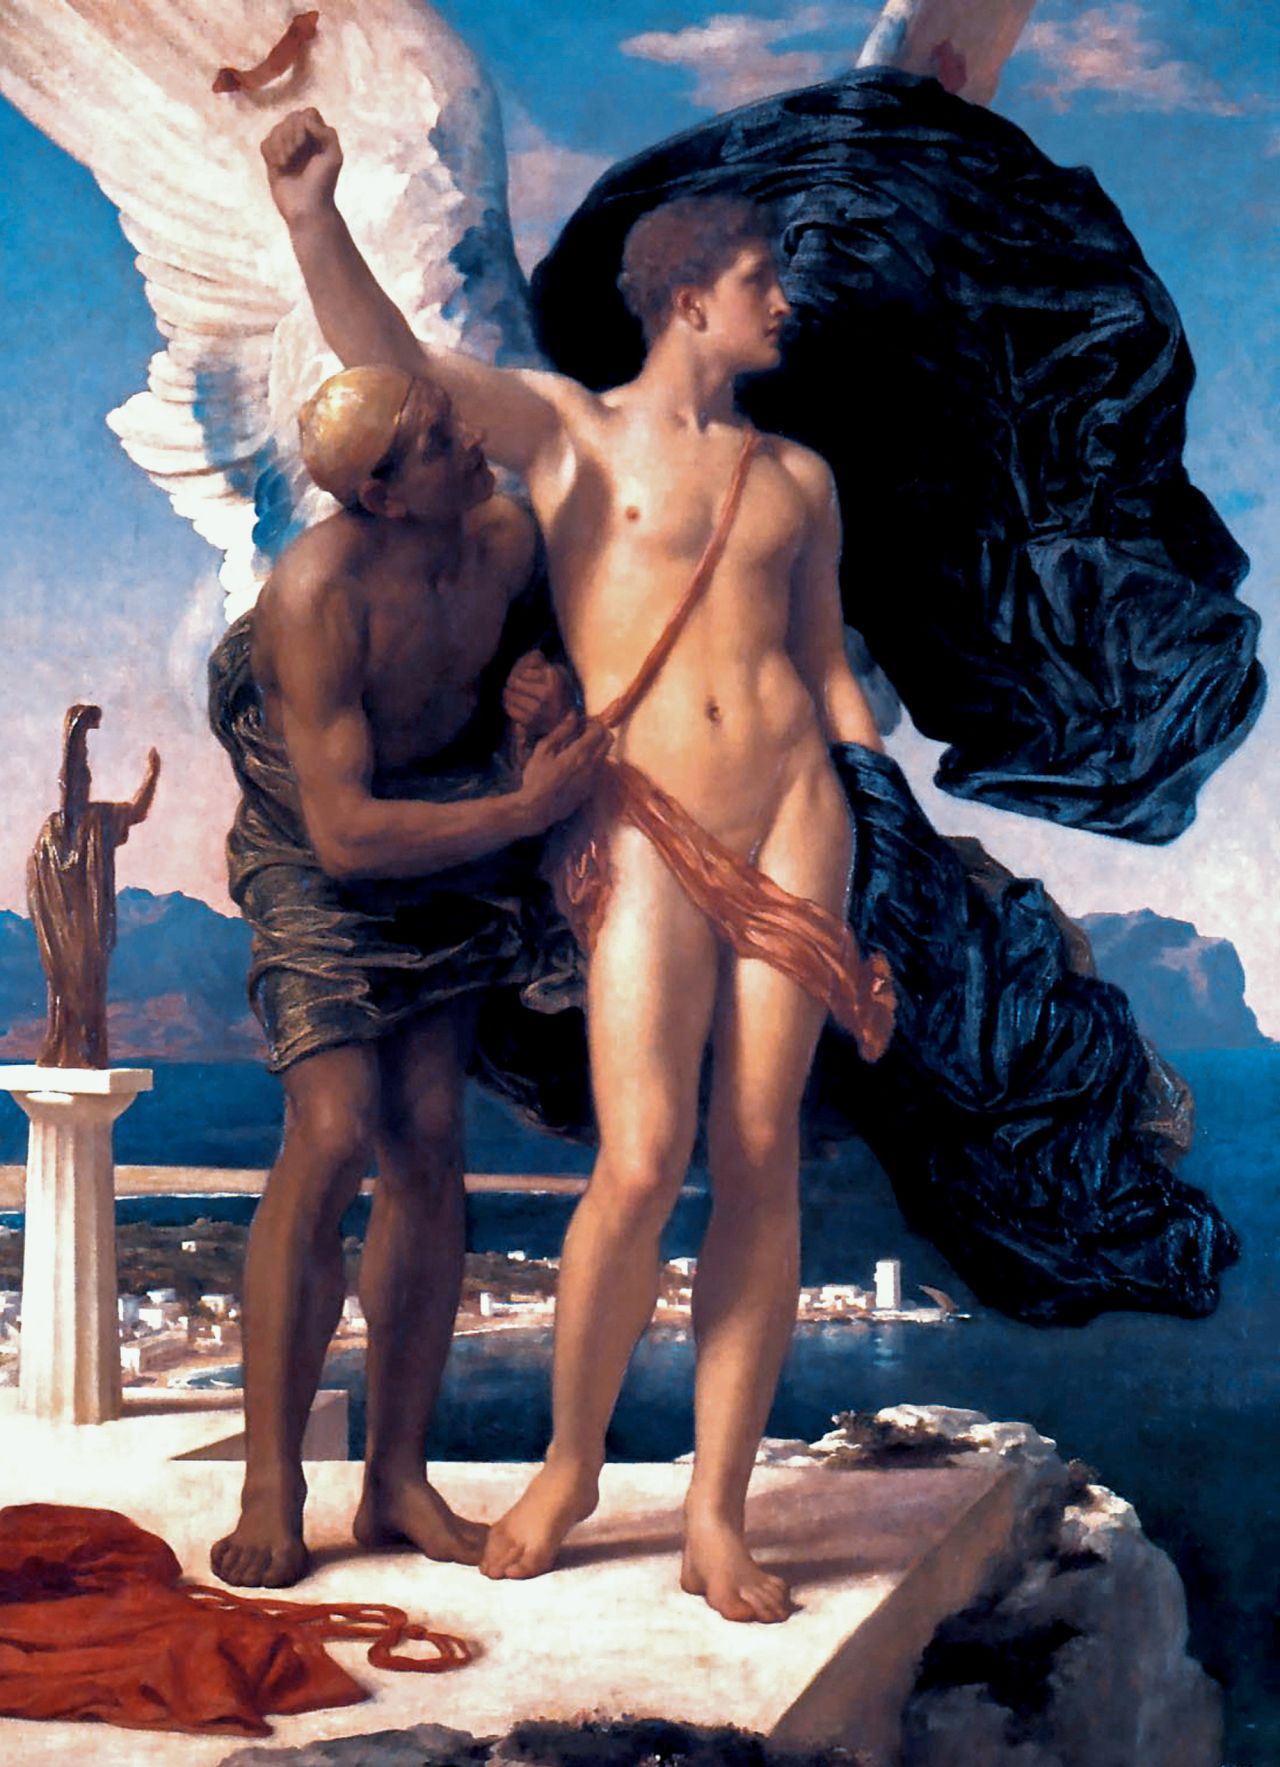 "Icarus and Daedalus" (c.1869) by Frederic Leighton